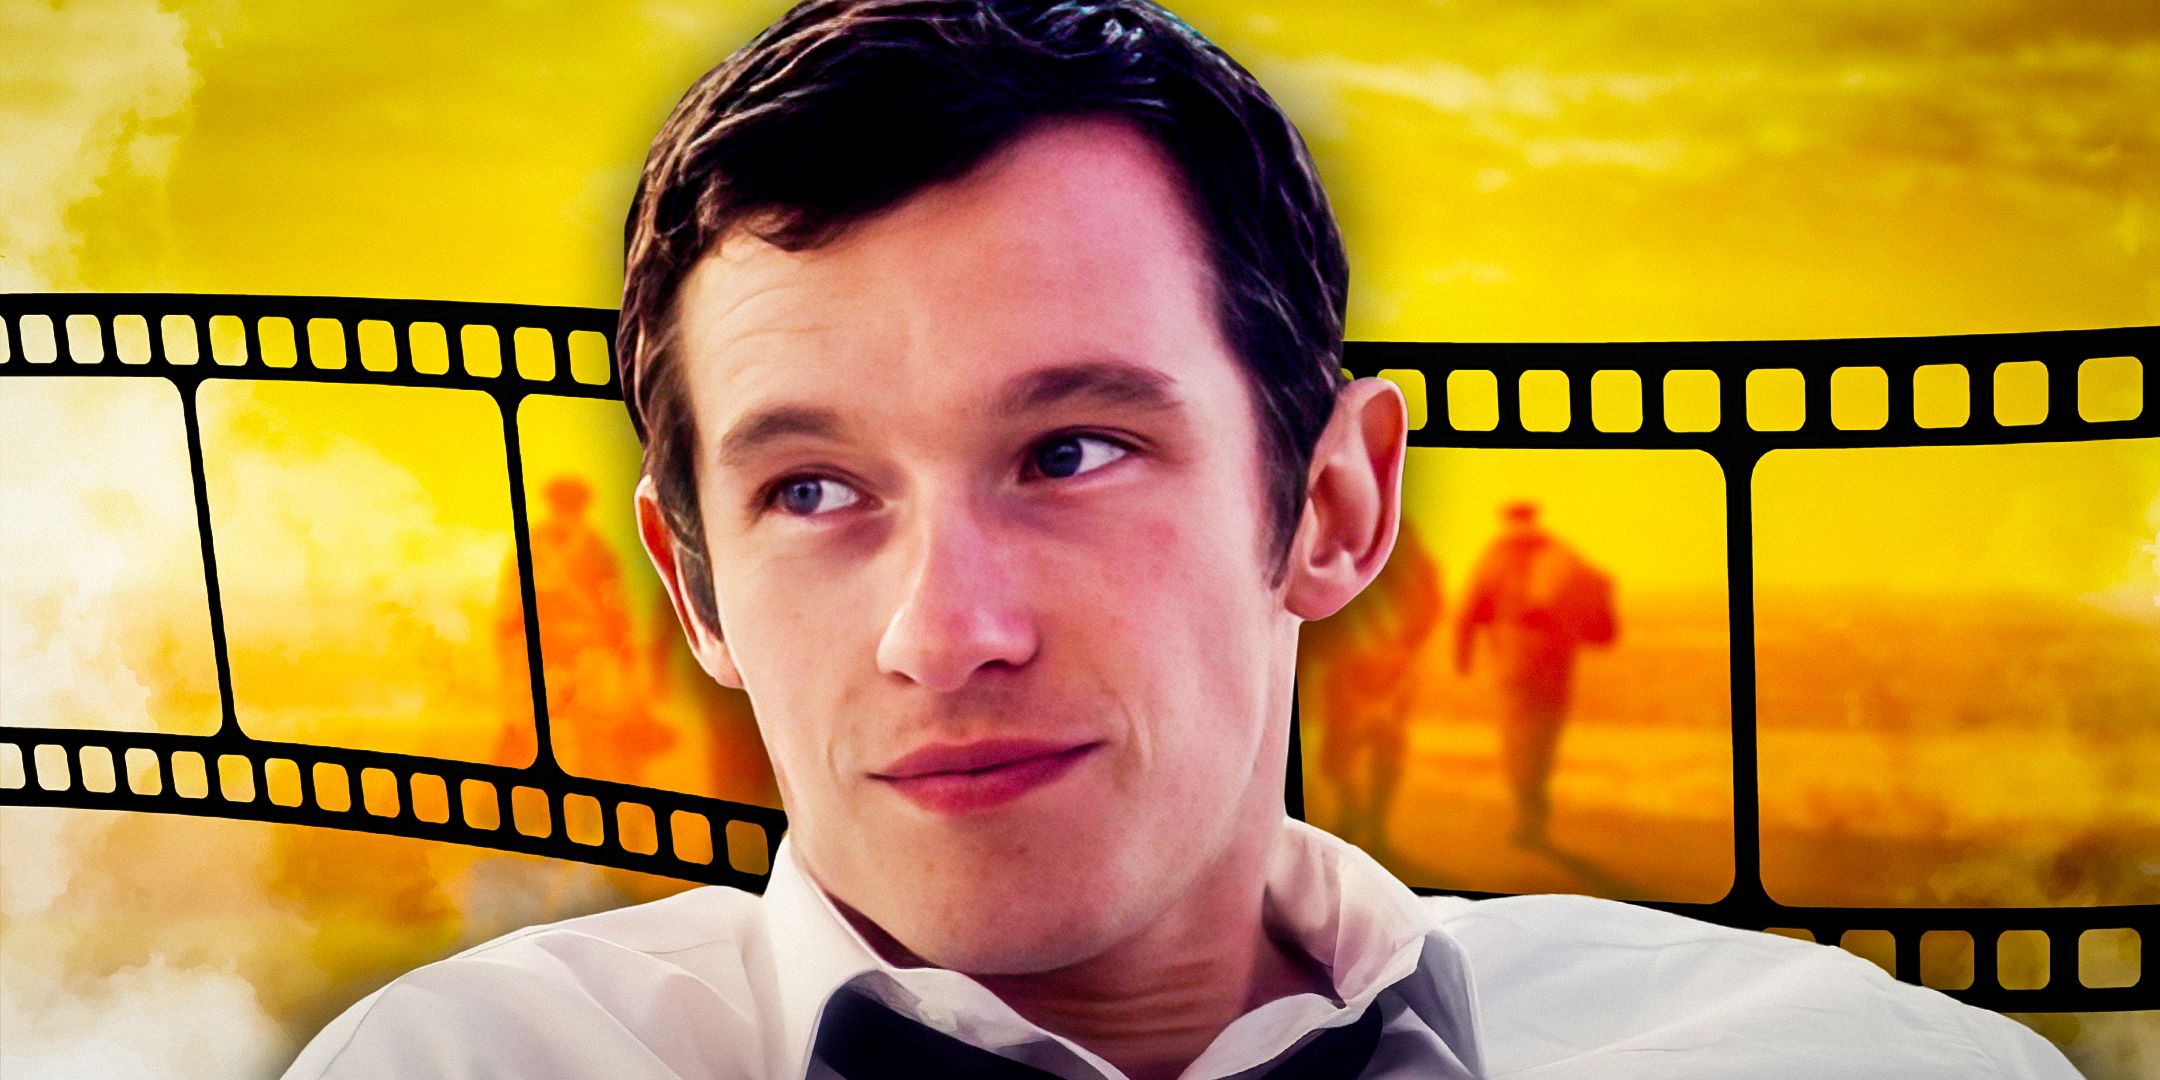 Callum Turner as Anthony O'Hare in The Last Letter from Your Lover